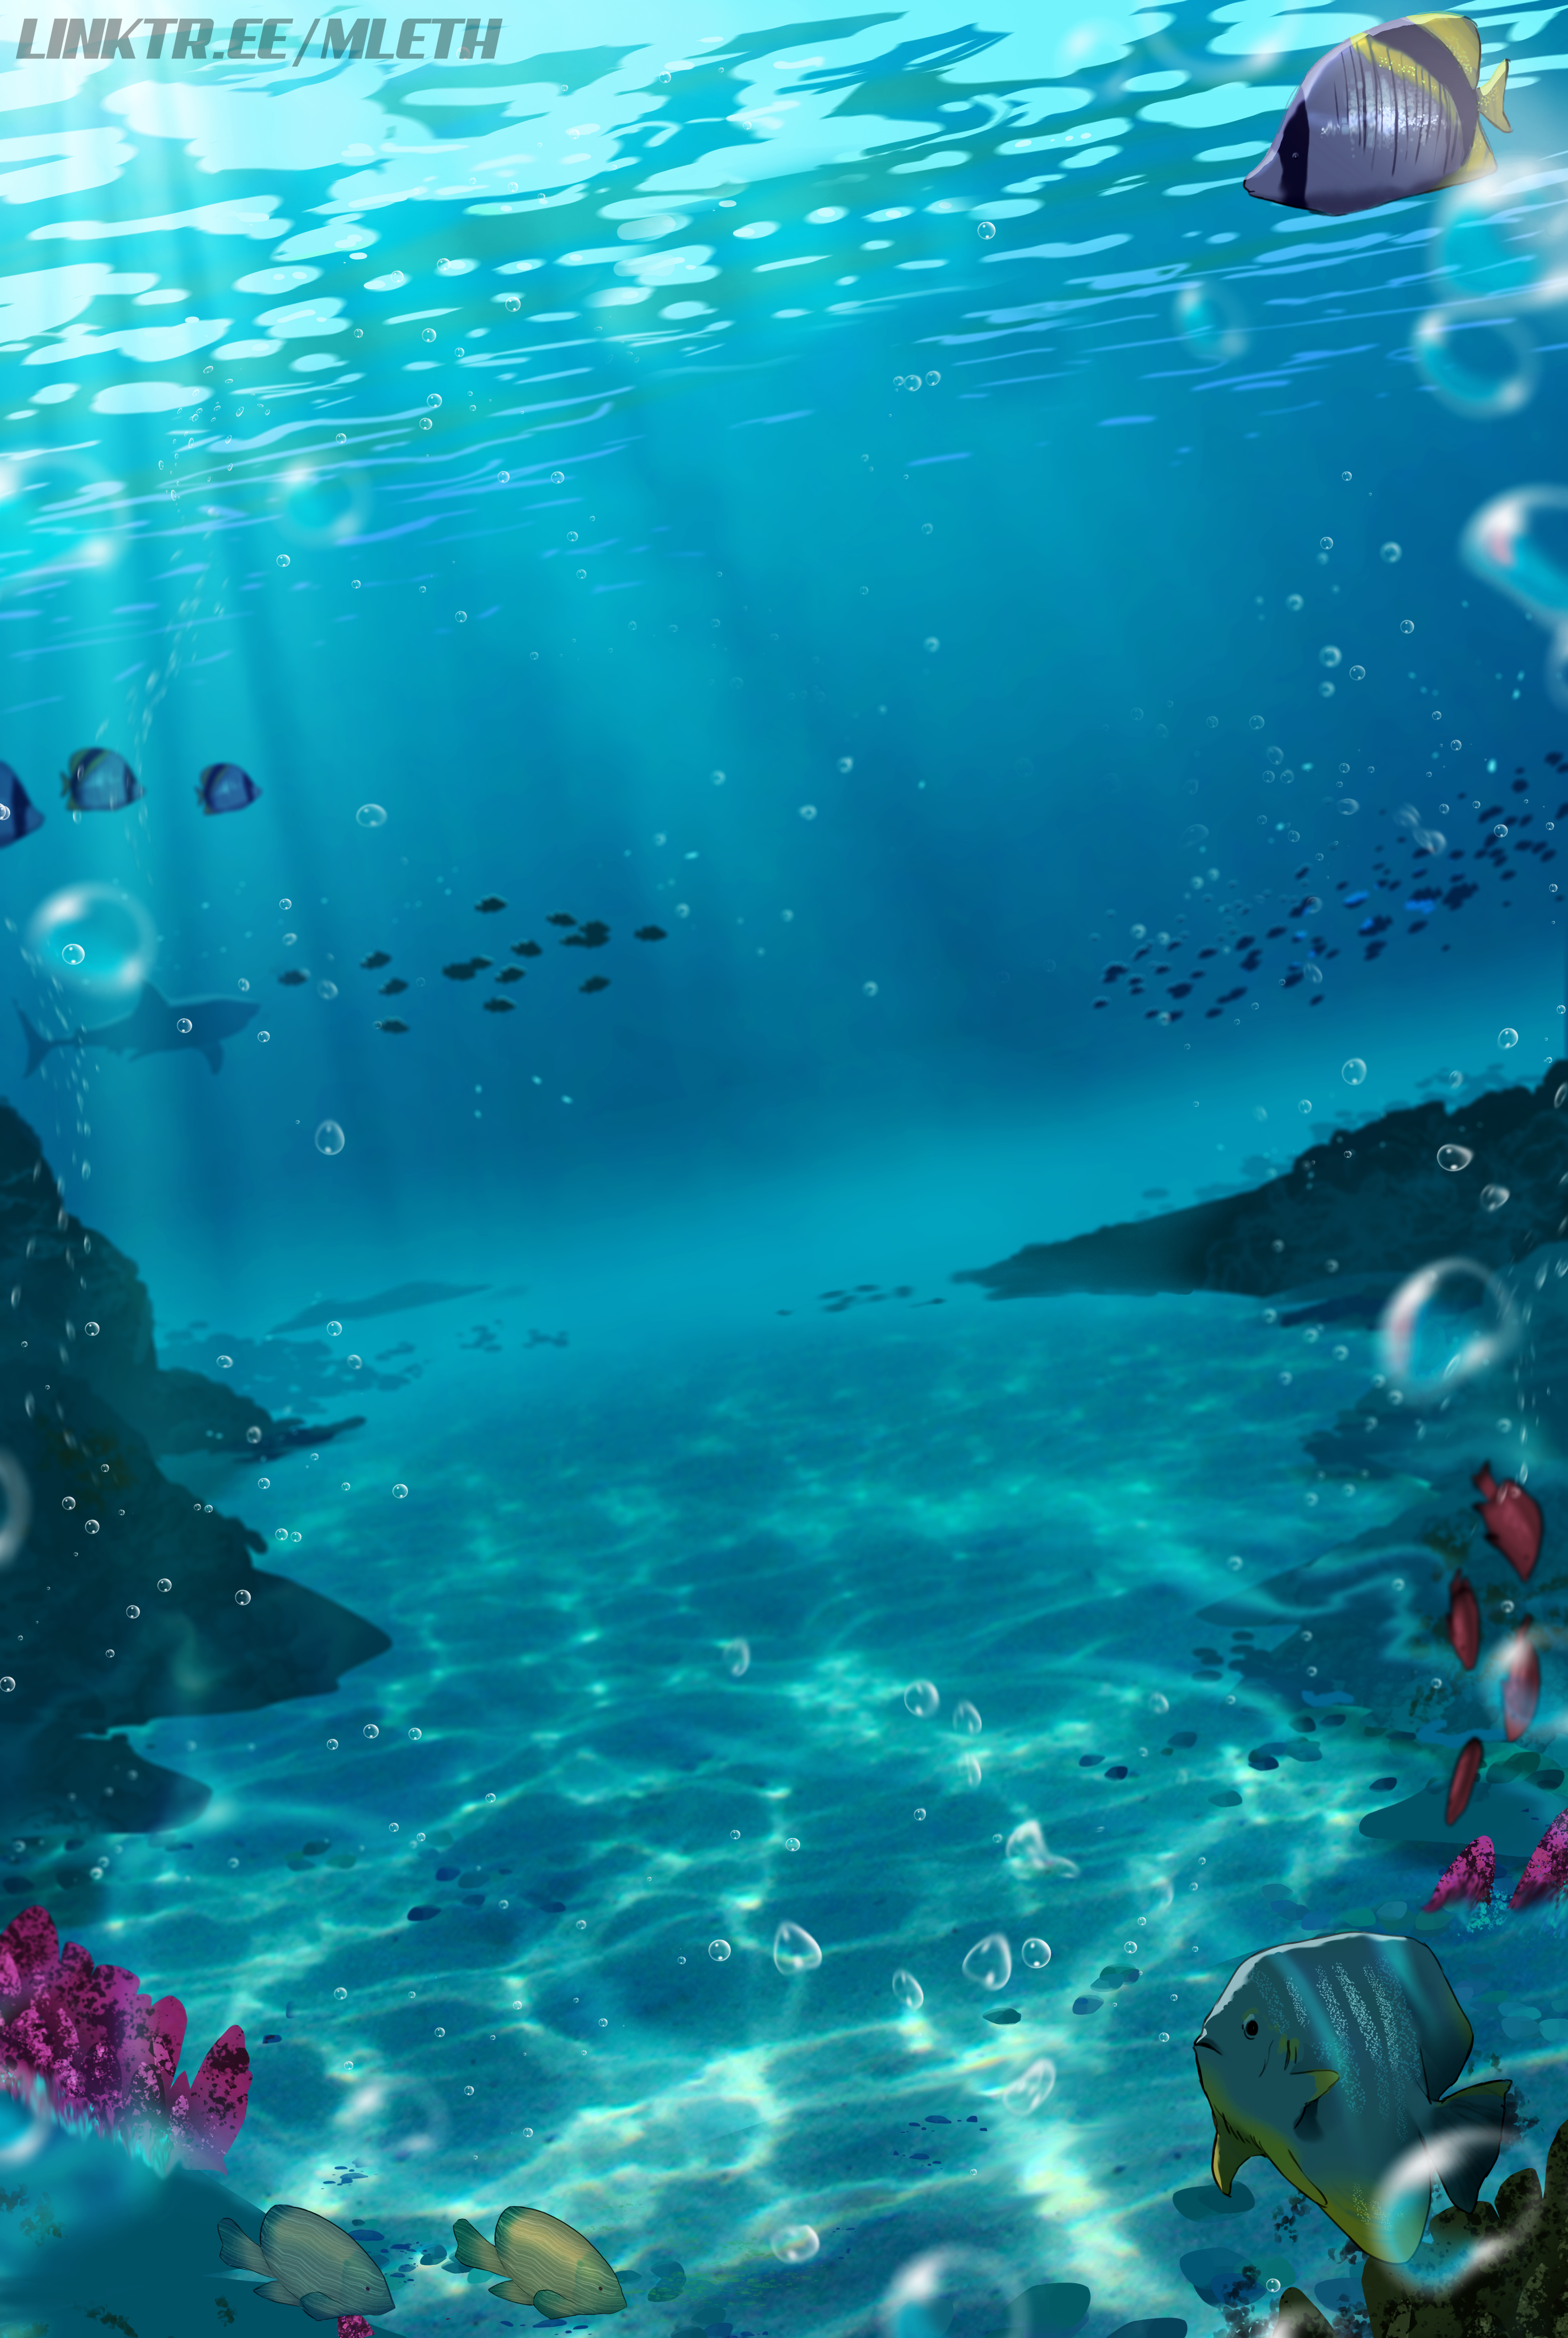 General 3626x5405 MLeth depth of field underwater digital art fish animals shark bubbles sea life coral blurry background water rocks nature sea